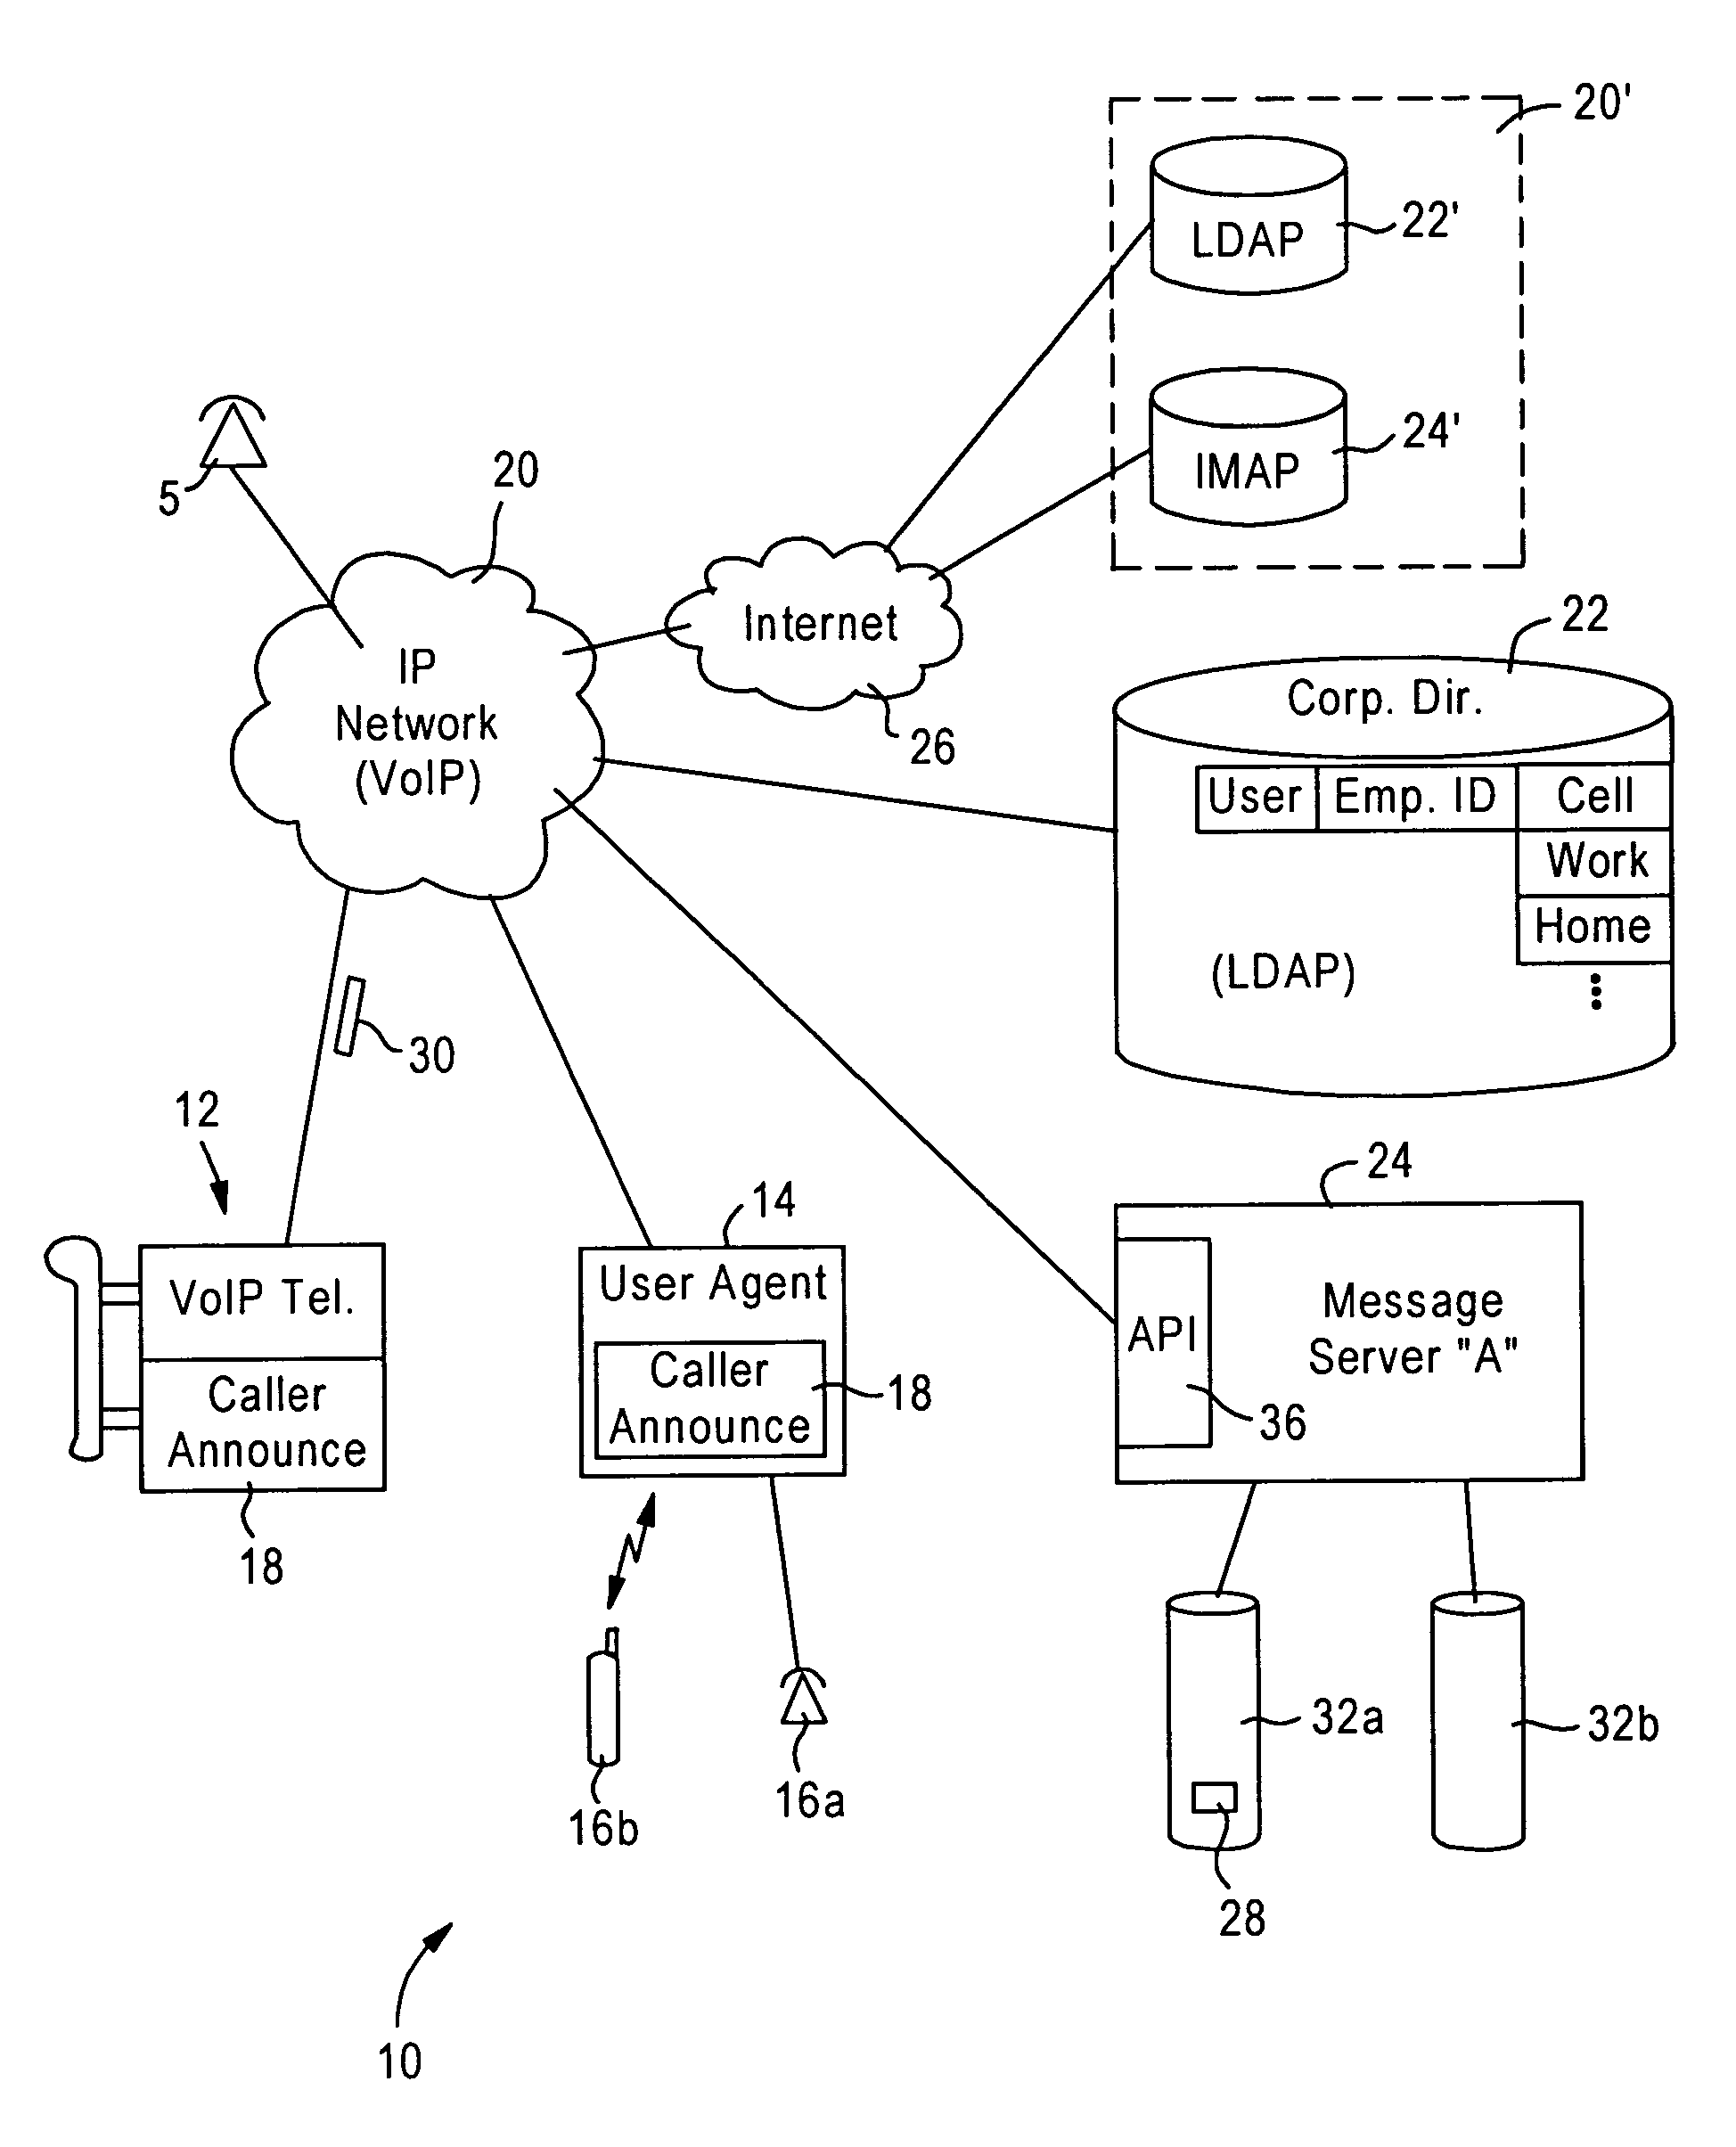 Arrangement for retrieving recorded audio announcements from a messaging system for identification of a calling party